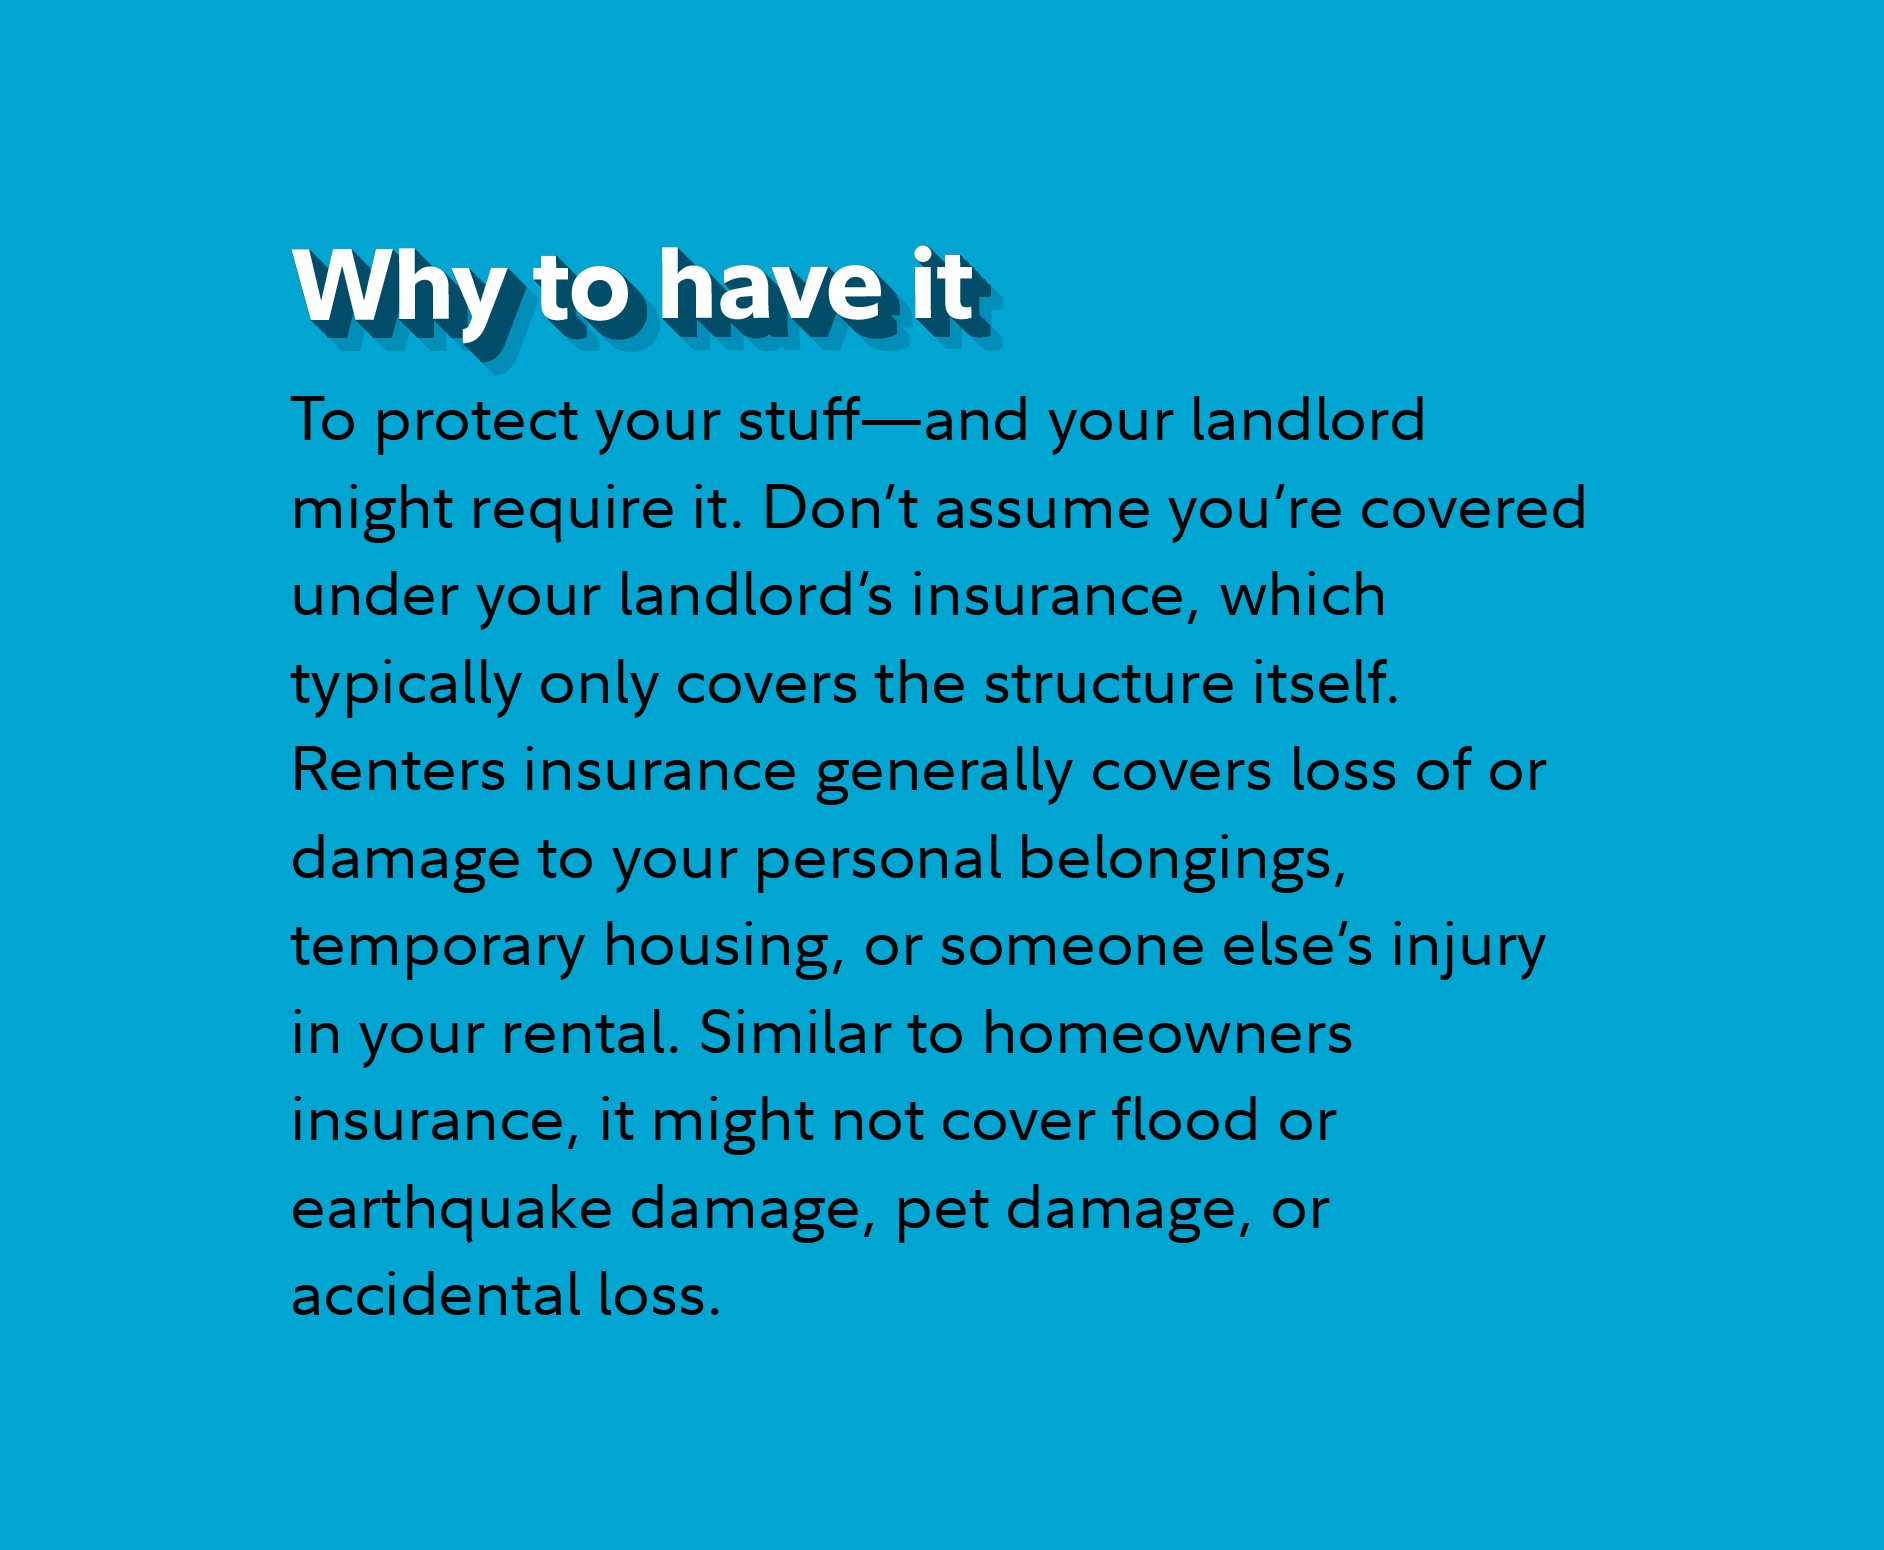 Why to have it To protect your stuff—and your landlord might require it. Don’t assume you’re covered under your landlord’s insurance, which typically only covers the structure itself. Renters insurance generally covers loss of or damage to your personal belongings, temporary housing, or someone else’s injury in your rental. Similar to homeowners insurance, it might not cover flood or earthquake damage, pet damage, or accidental loss.